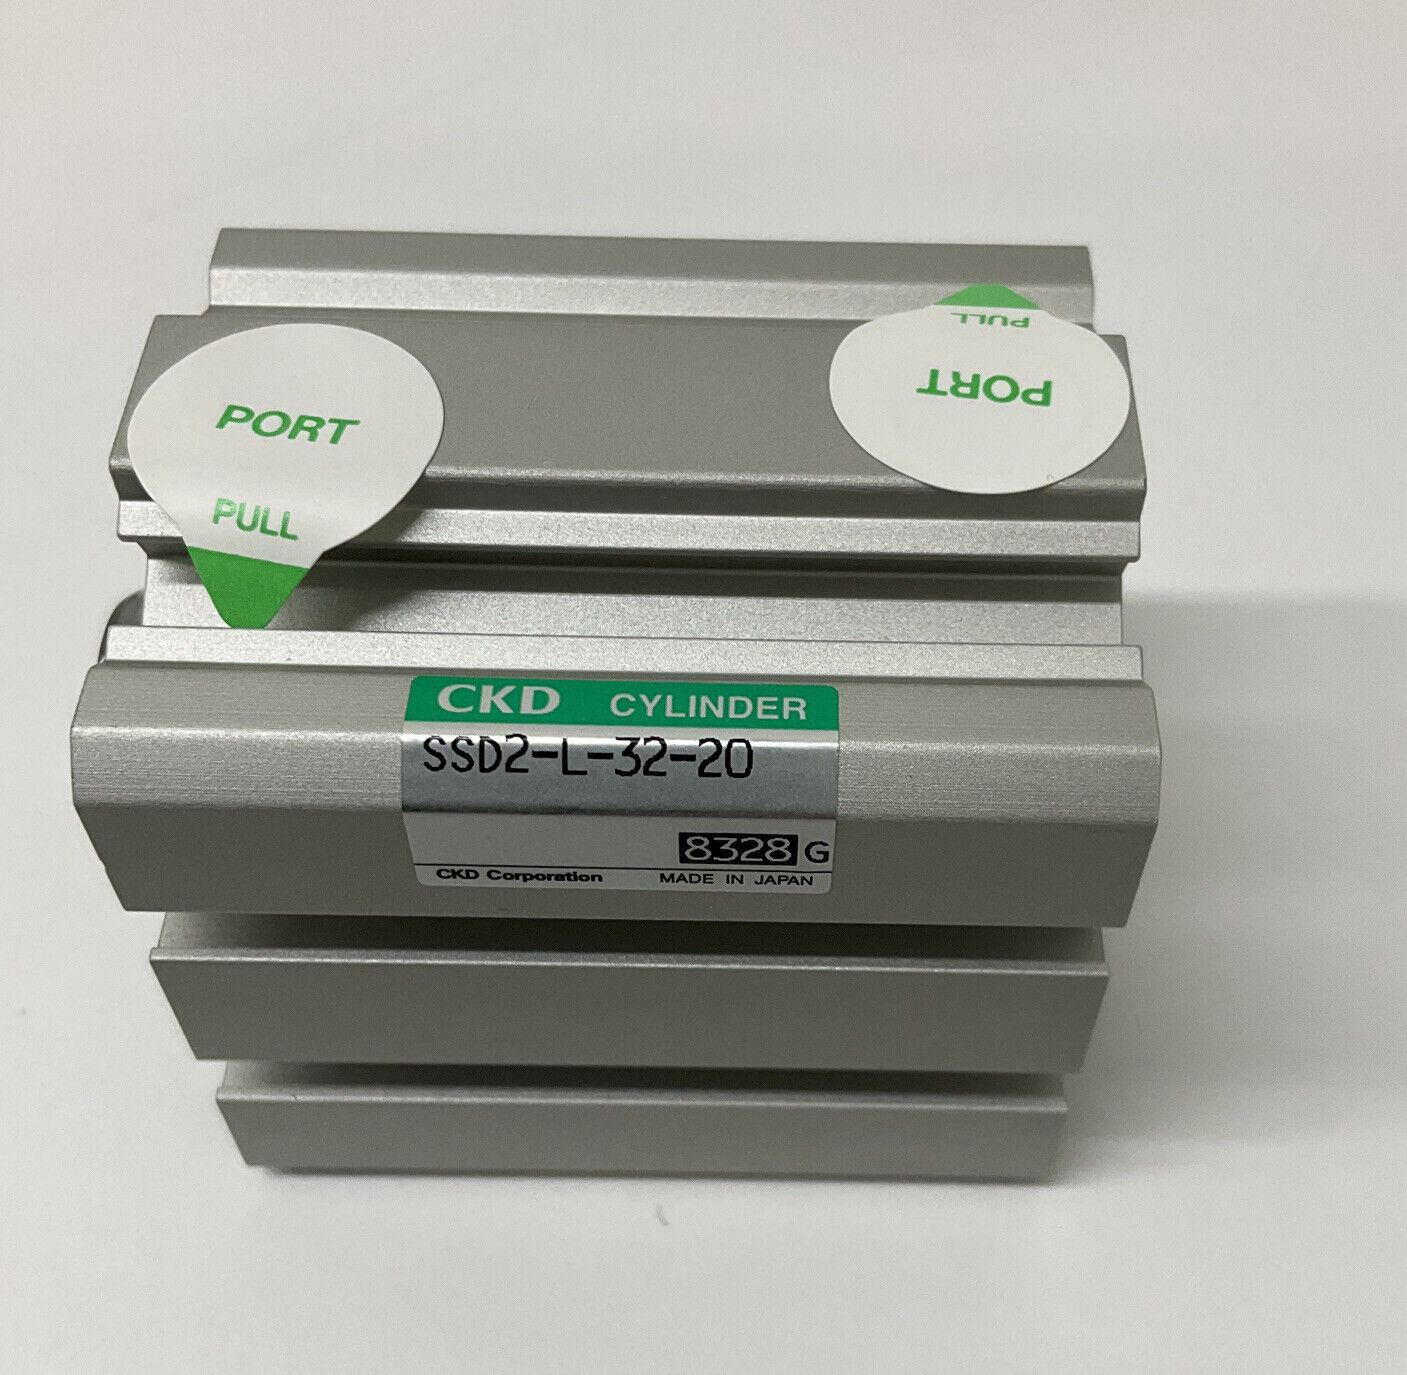 CKD  SSD2-L-32-20 Compact Pneumatic Cylinder  (YE155) - 0